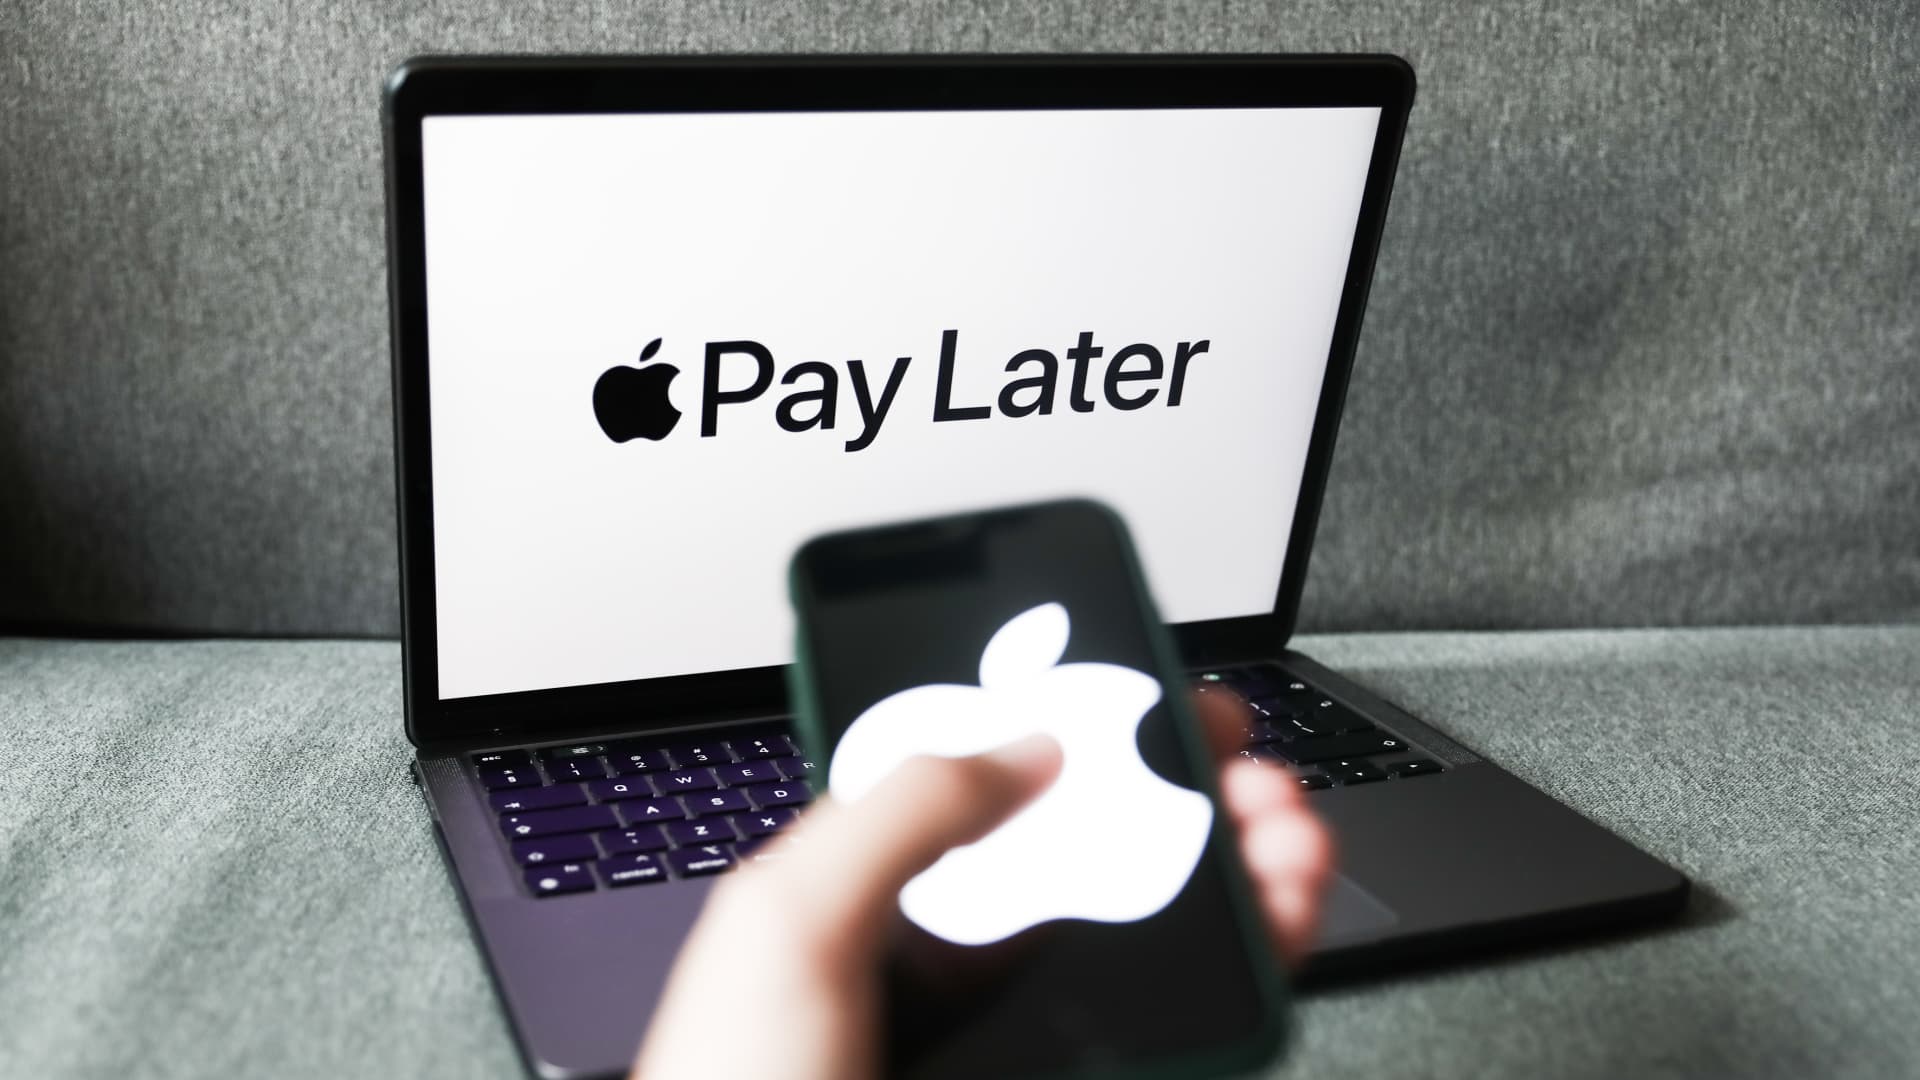 'Buy now, pay later' firms were already in trouble. Apple just gave them one more thing to worry about - CNBC